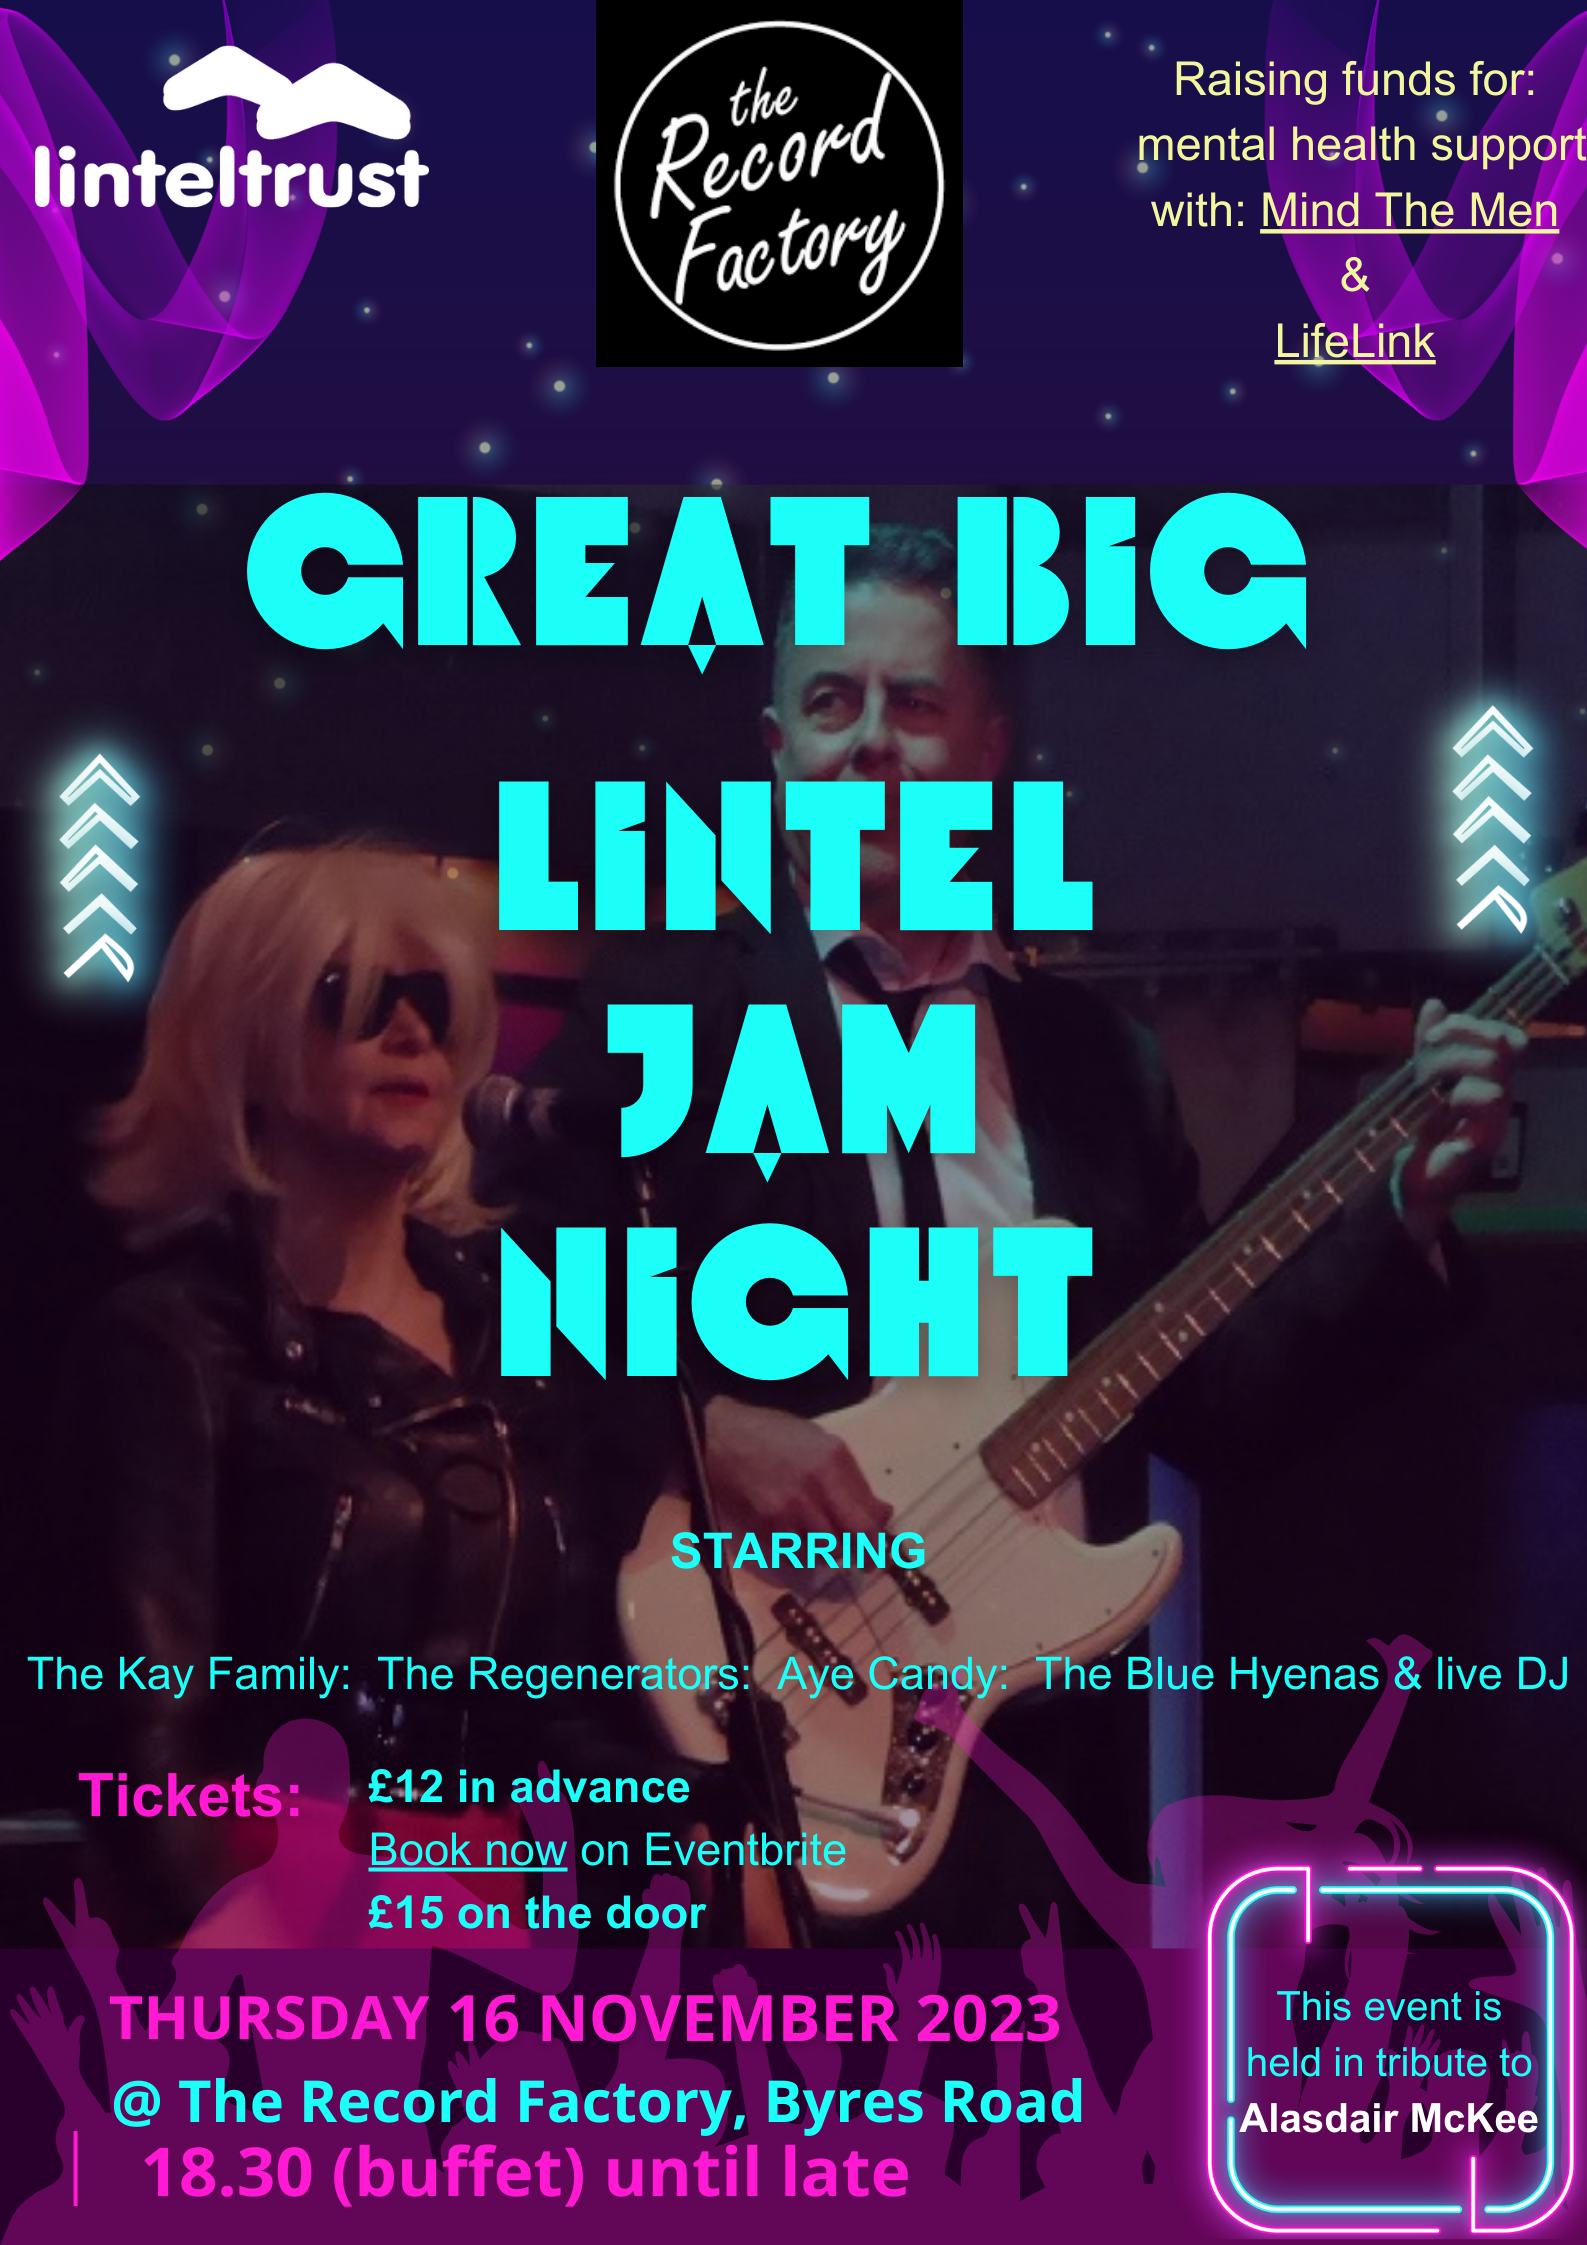 Great Big Lintel Jam Night: A must-attend event for Scotland's housing sector!